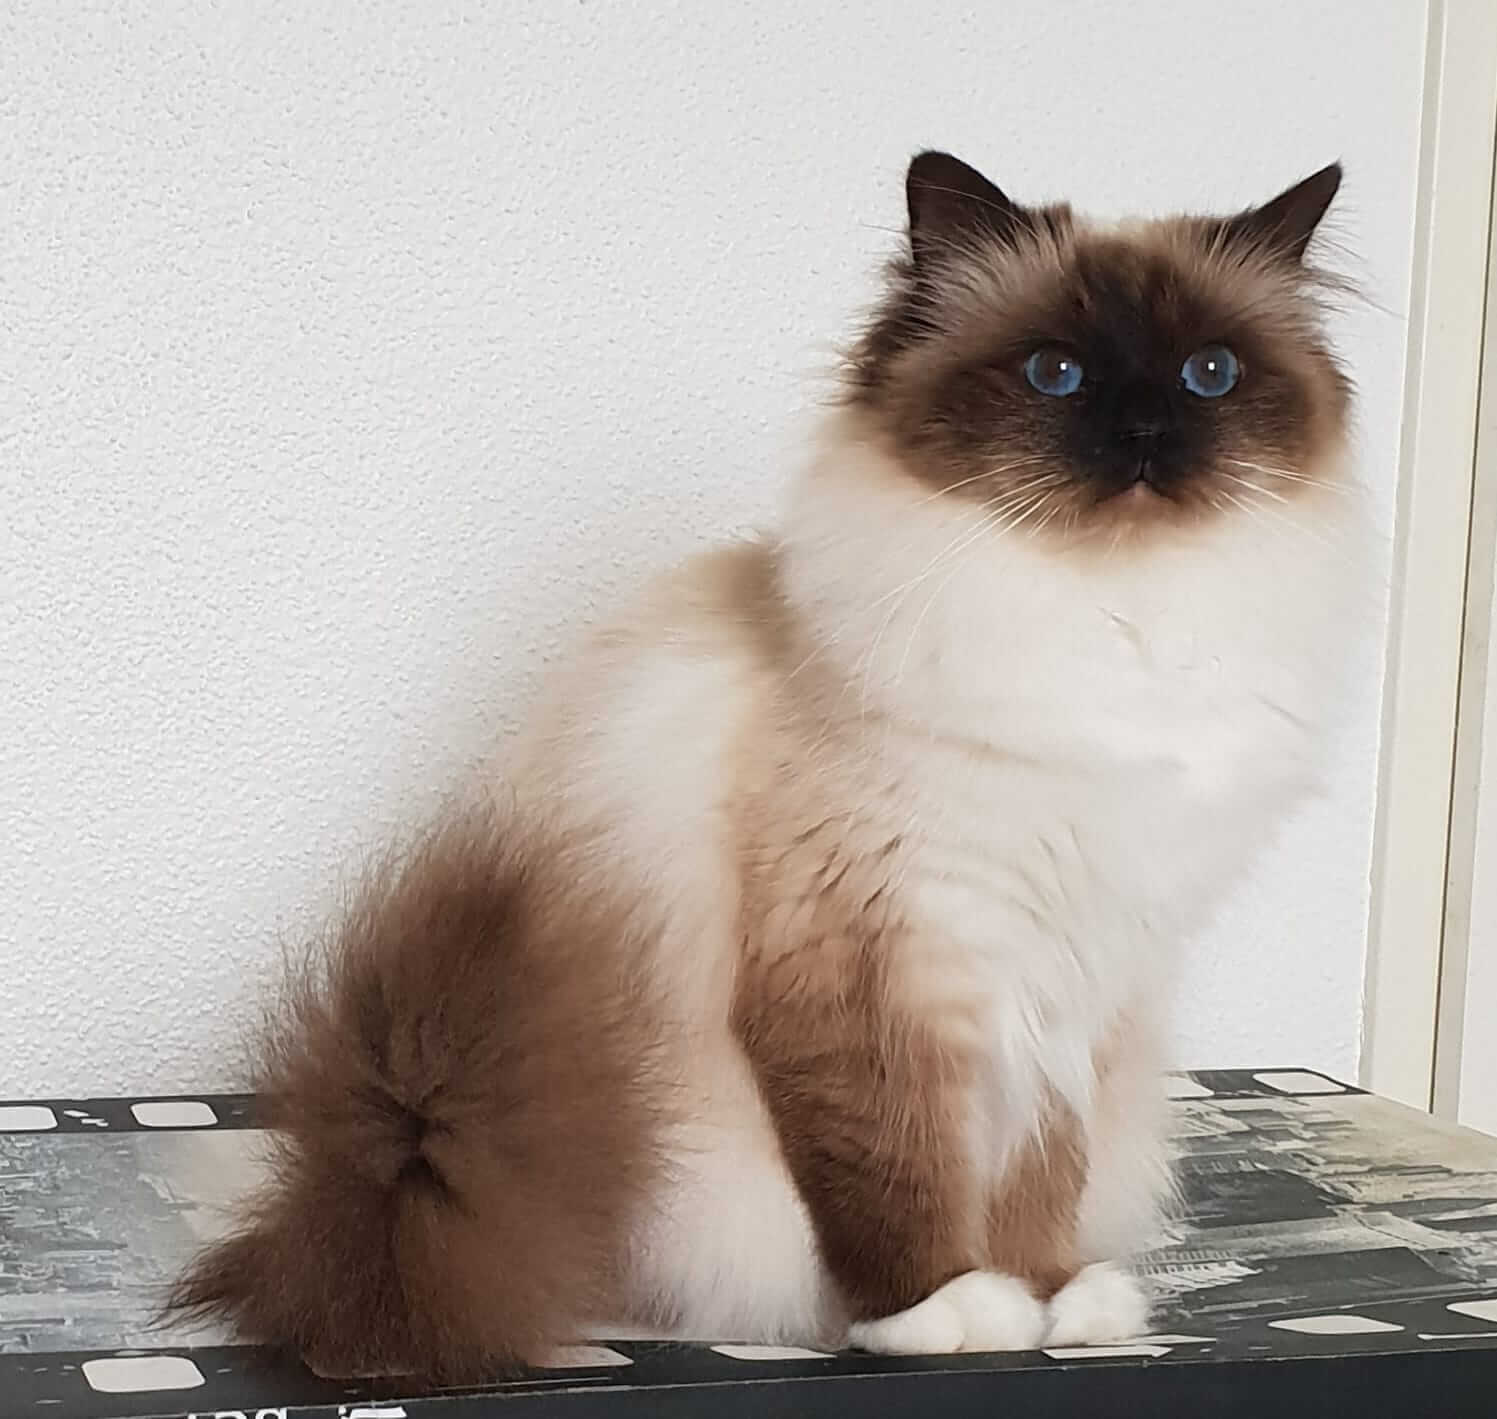 Birmaclub - Comprehensive and detailed information about the Birman cat